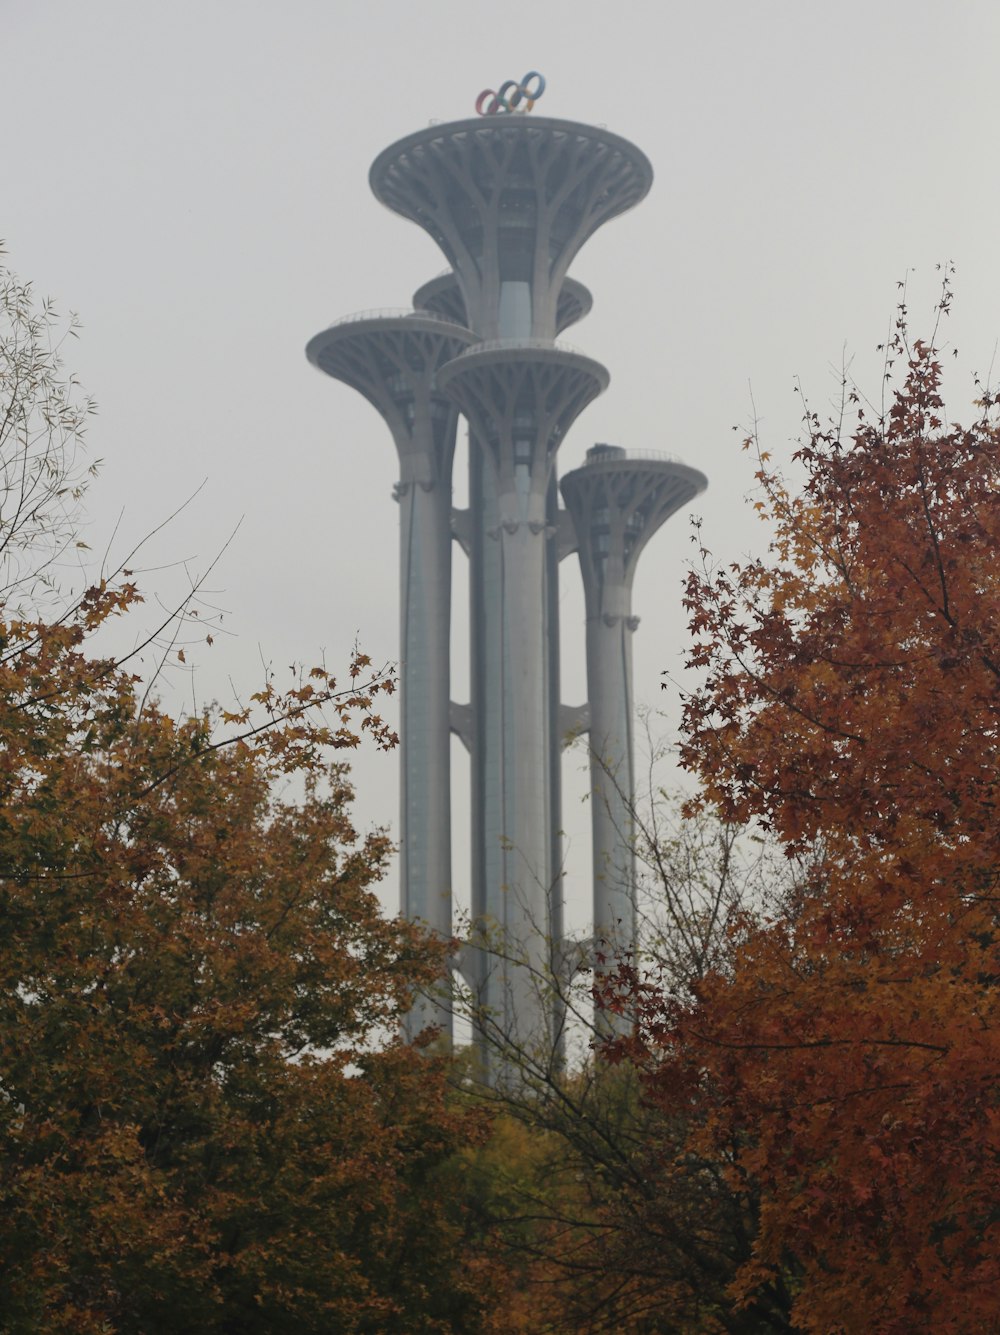 a tall tower with two rings on top of it